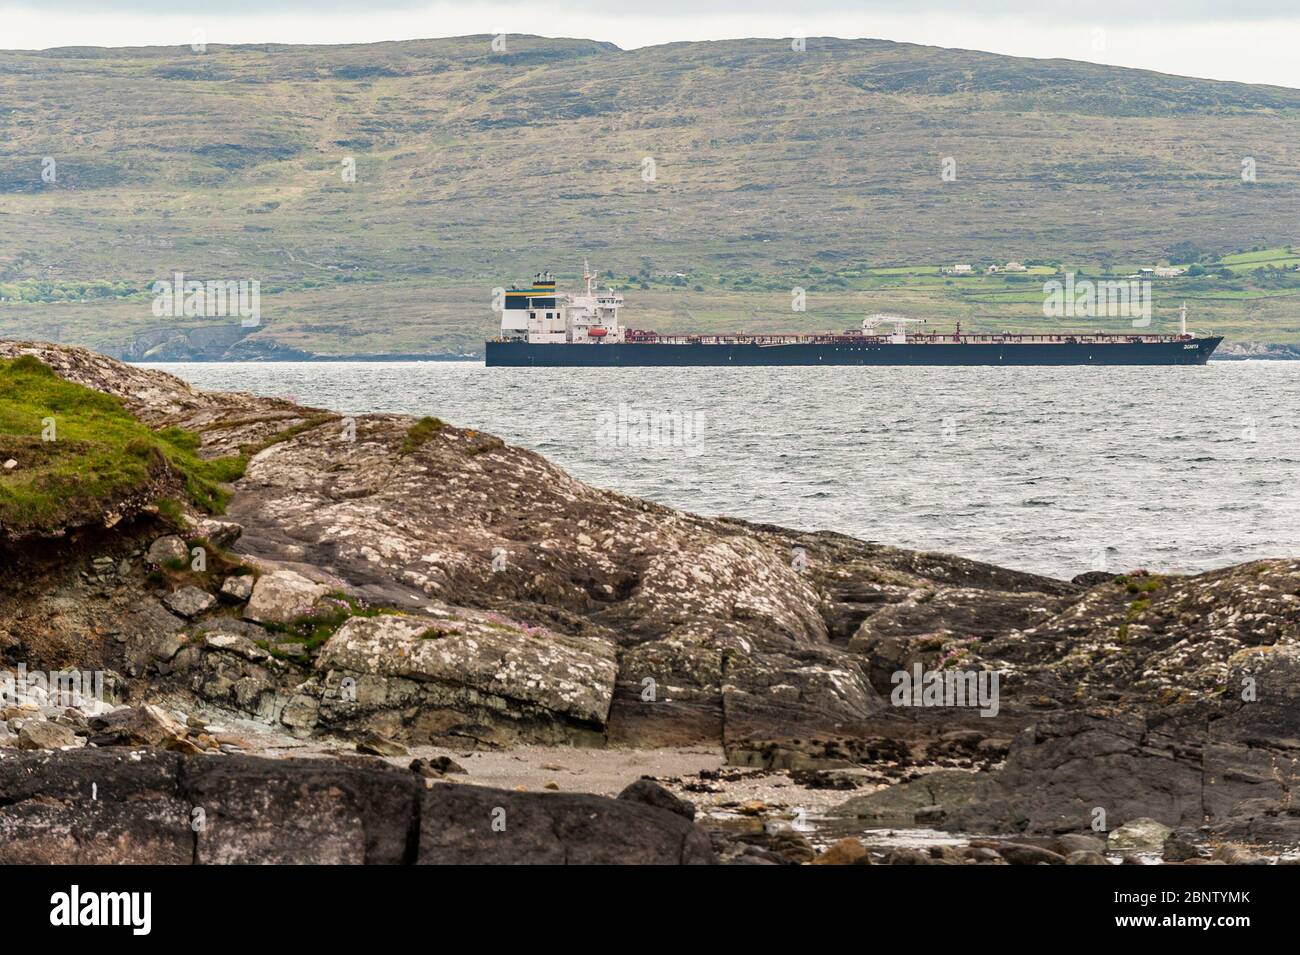 Bantry Bay, West Cork, Ireland. 16th May, 2020. US tanker 'Bonita' is currently moored in Bantry Bay, waiting to offload her cargo of crude at Whiddy Island Oil Terminal. The Covid-19 pandemic has caused a world wide drop in demand for petroleum, thus making storage hard to find. Credit: AG News/Alamy Live News Stock Photo